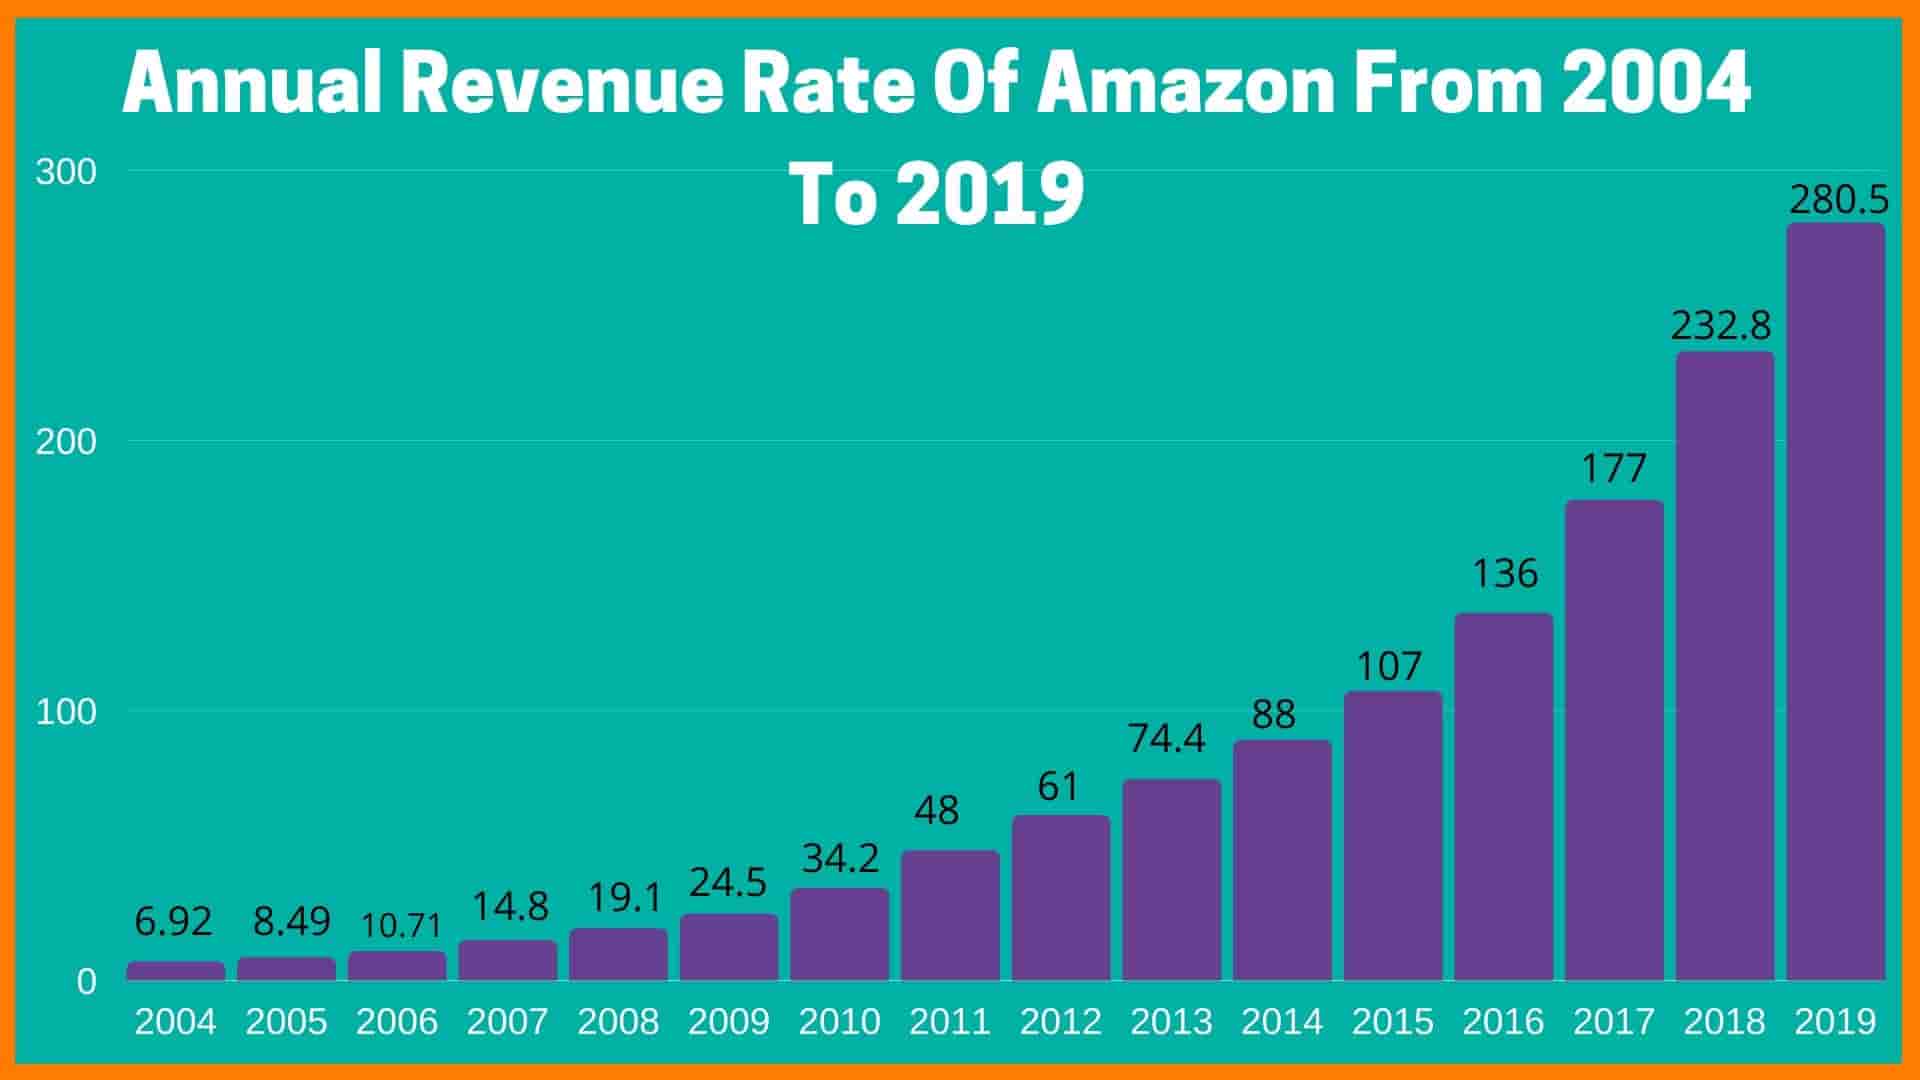 Annual Growth Of Amazon In India